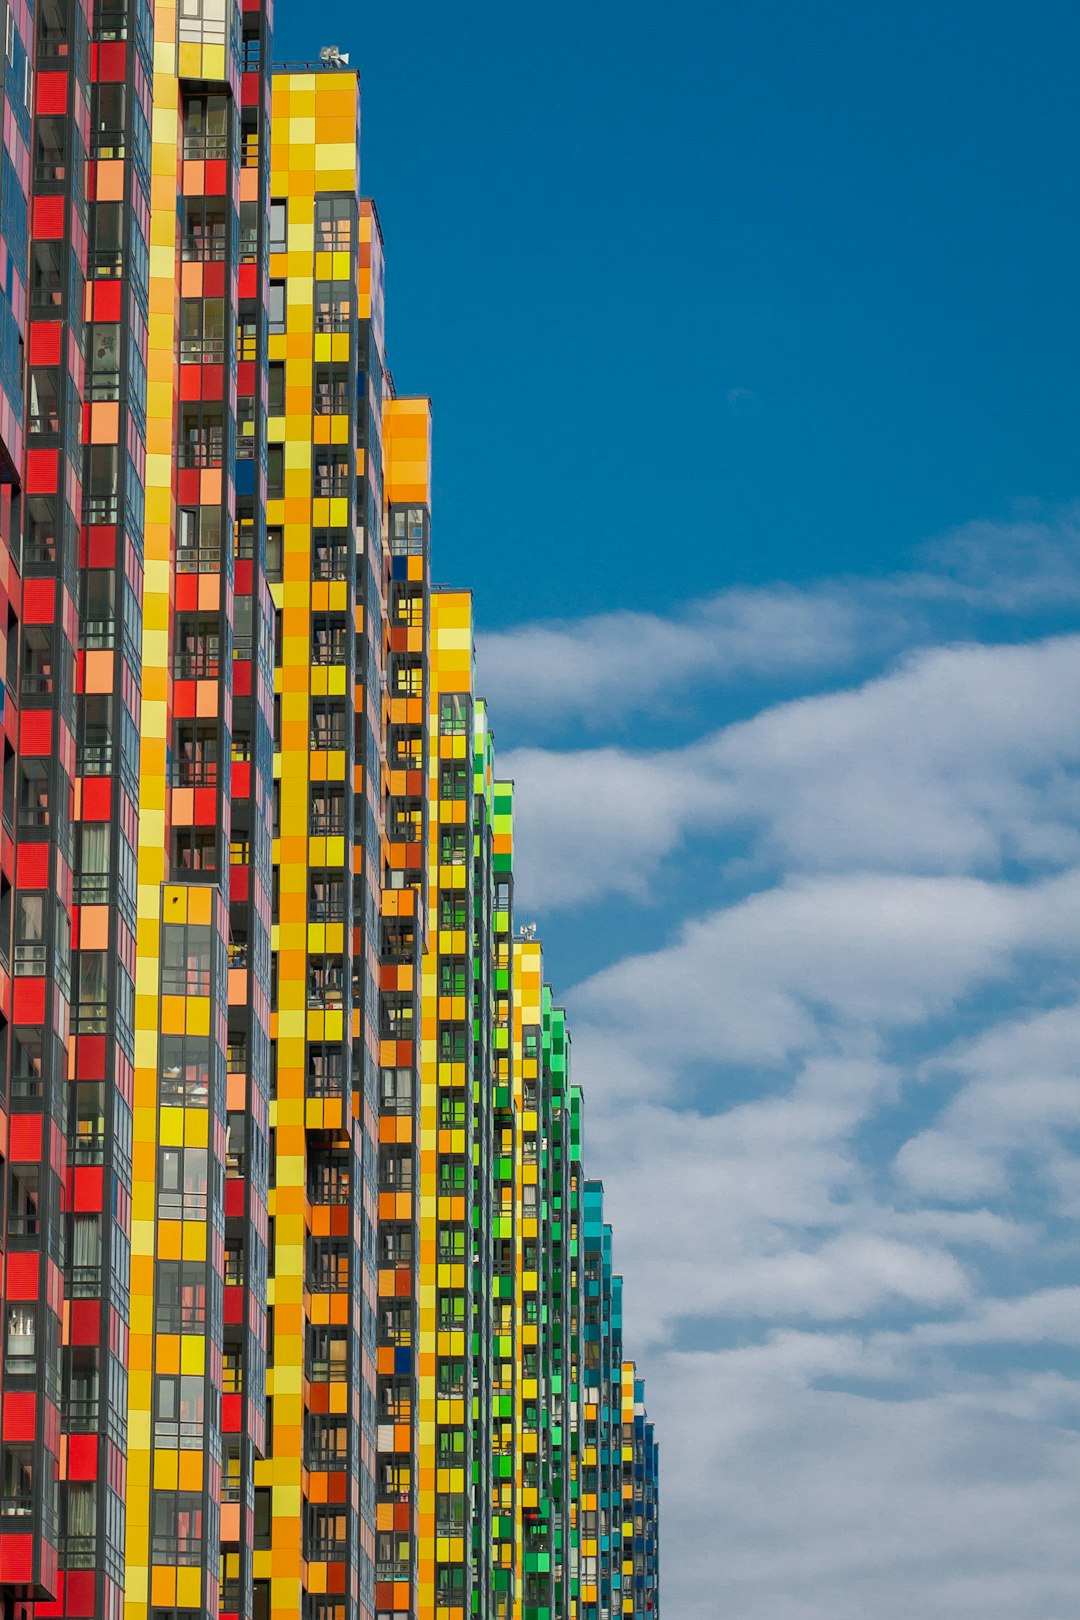 red yellow and green concrete building under blue sky during daytime